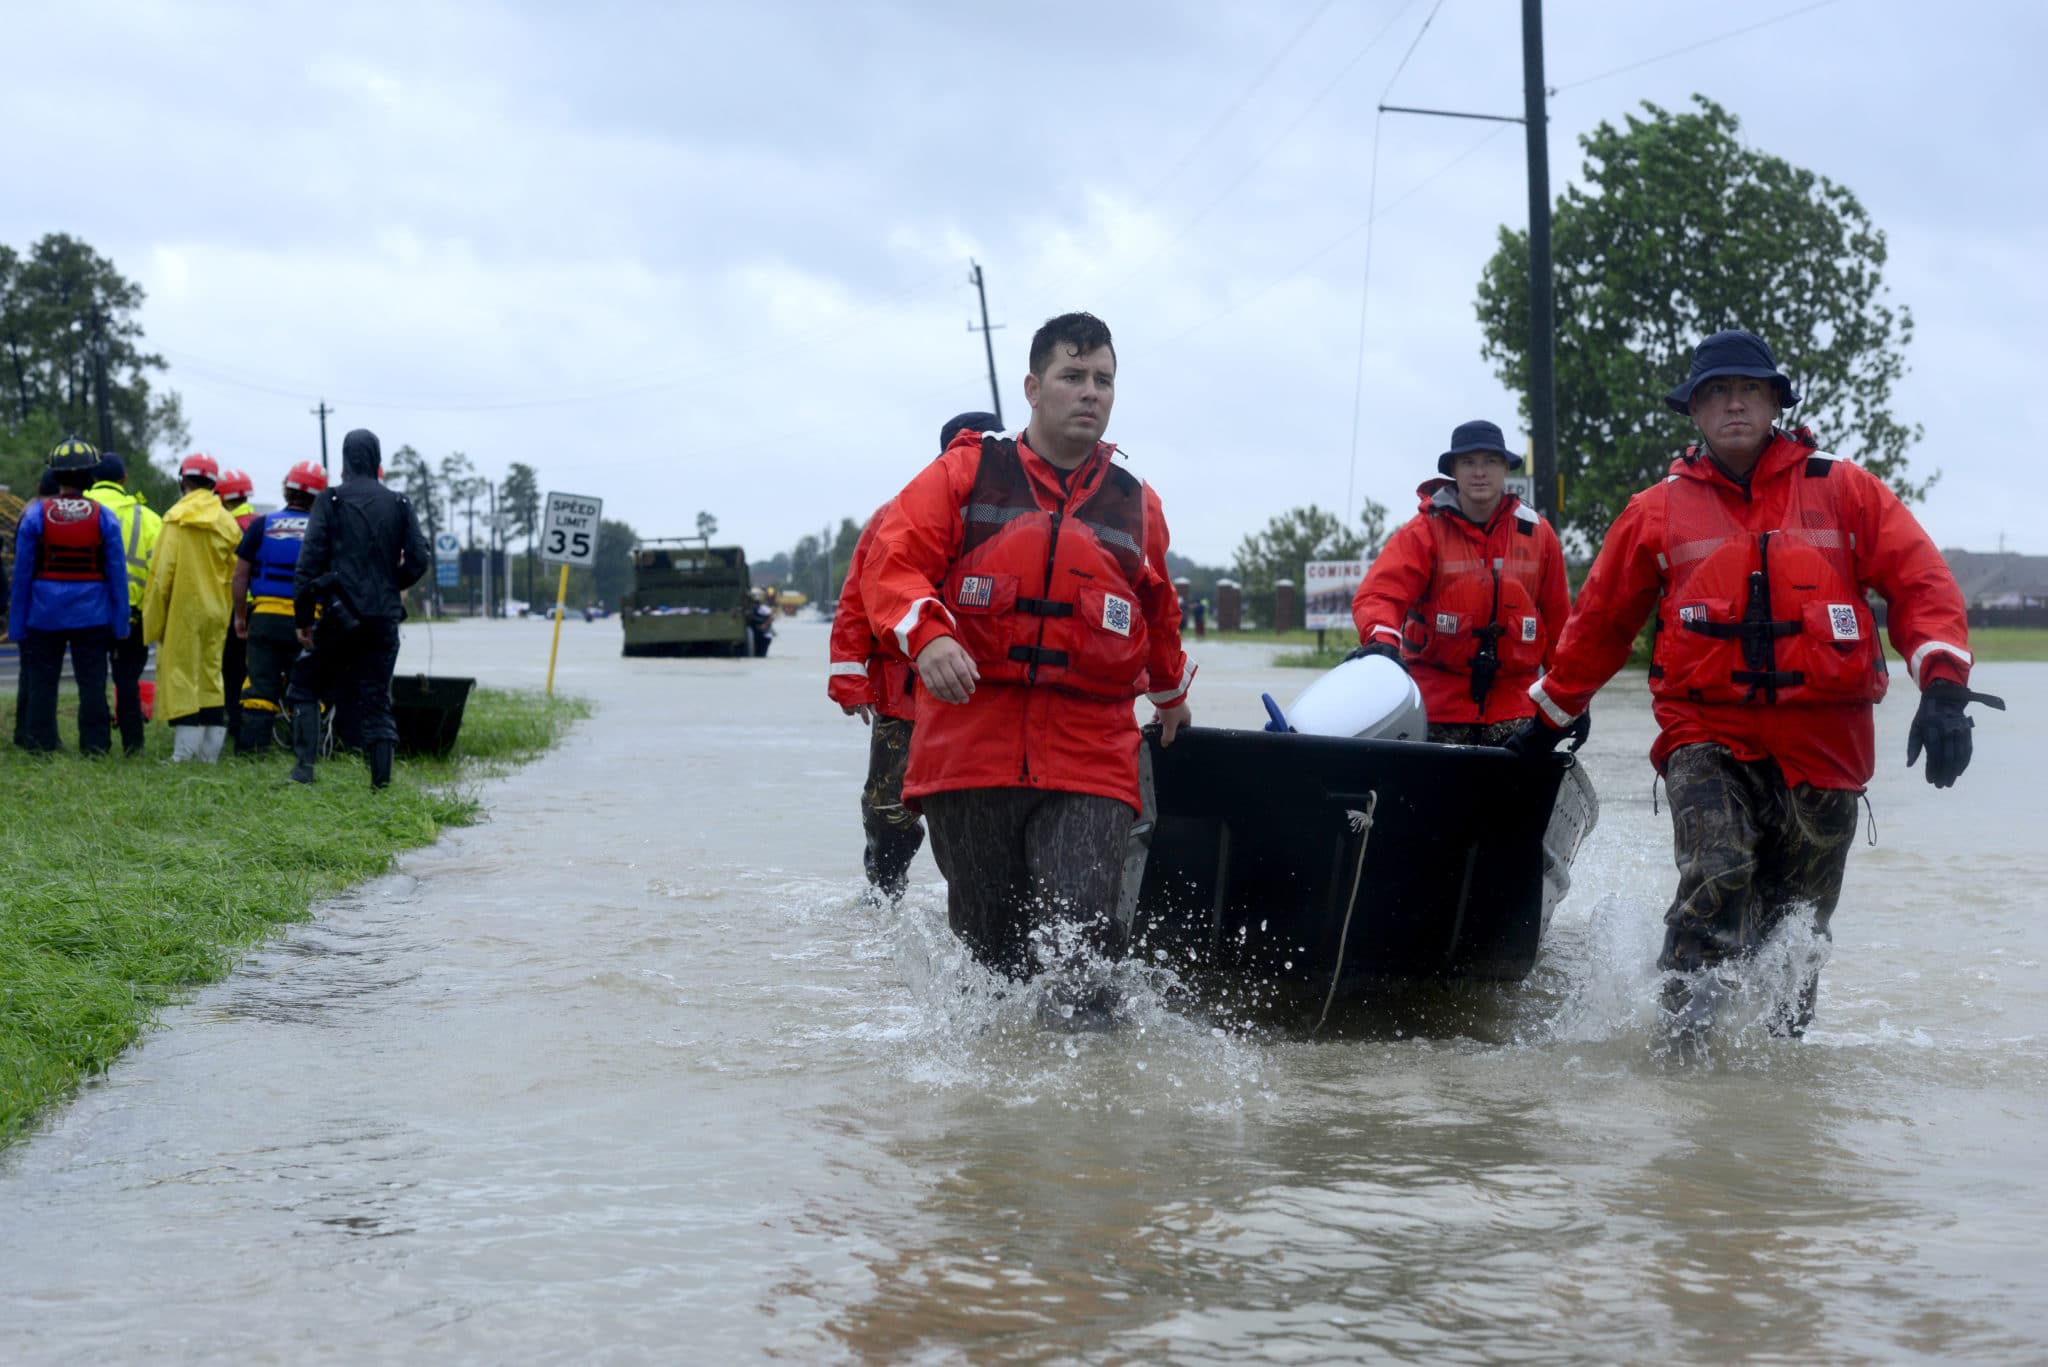 Coast Guard members evacuate survivors of Hurricane Harvey in the greater Houston Metro Area Aug. 29, 2017. Members of the Coast Guard's Deployable Specialized Forces from Maritime Safety and Security Team (MSST) New Orleans, MSST Miami, MSST Houston, the Atlantic Strike Team, and the Gulf Strike Team. (U.S. Coast Guard photo by Petty Officer 3rd Class Travis Magee/Released)